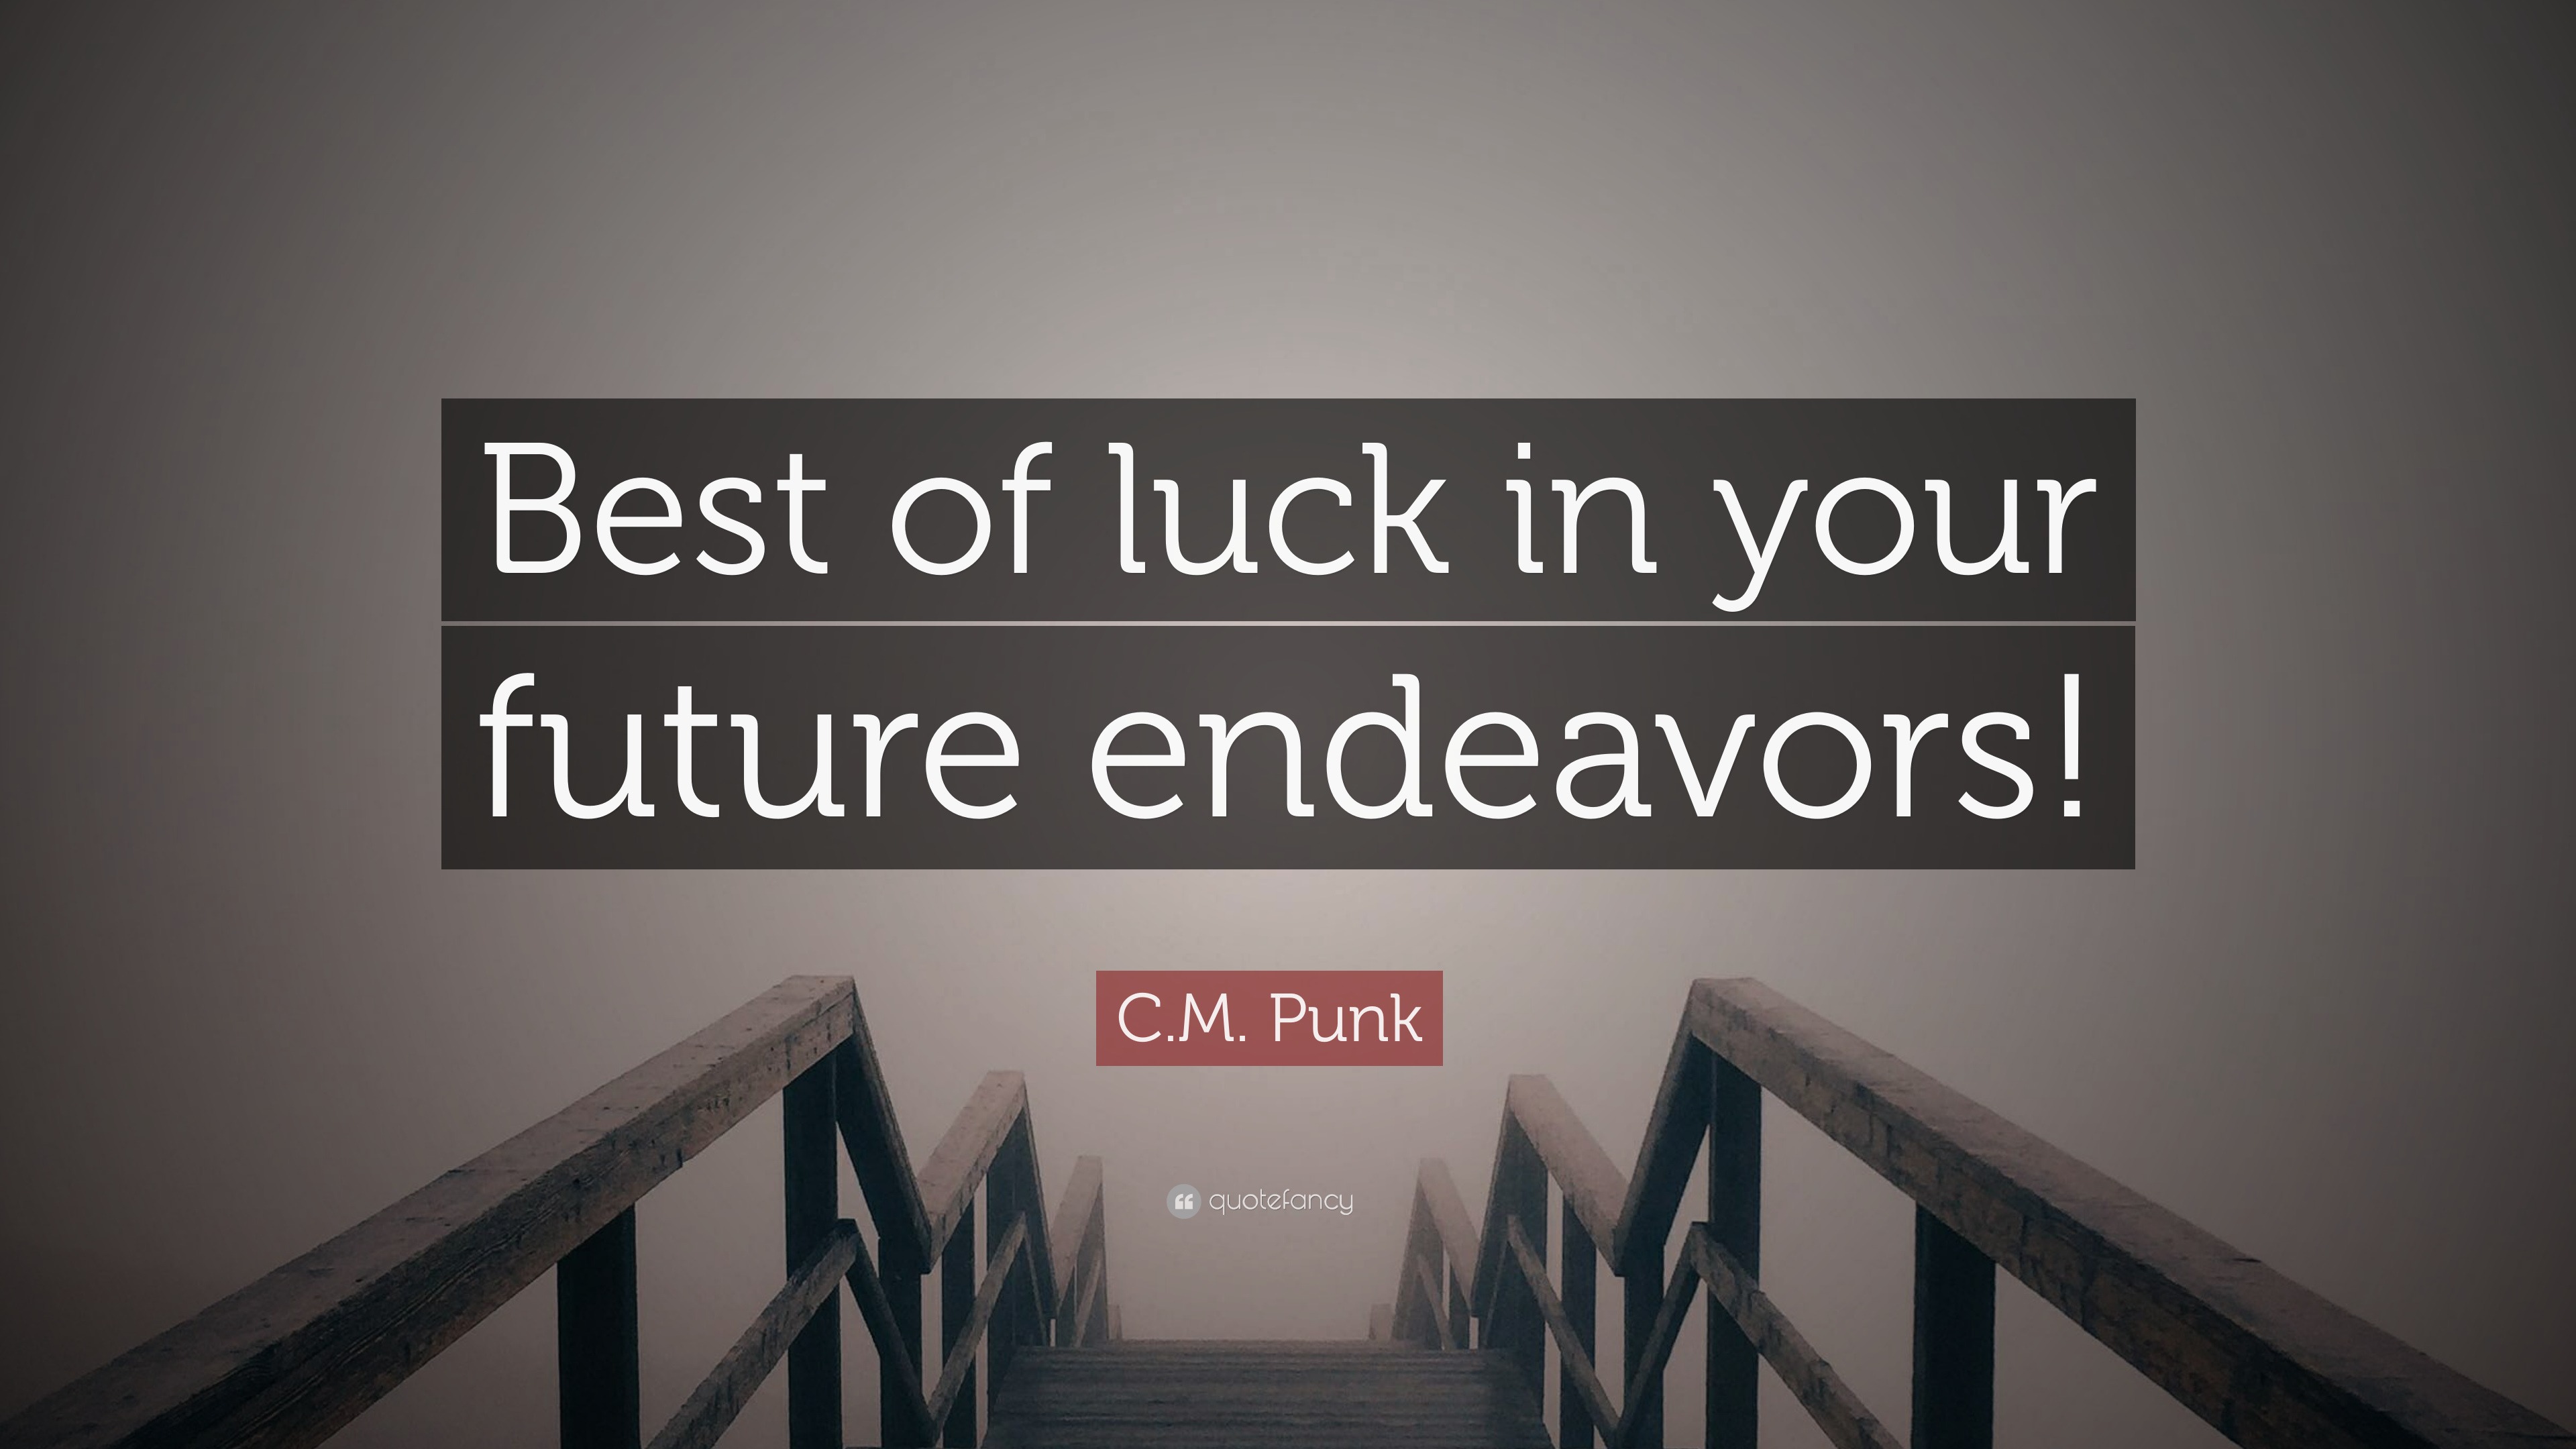 C.M. Punk Quote: “Best of luck in your future endeavors!”